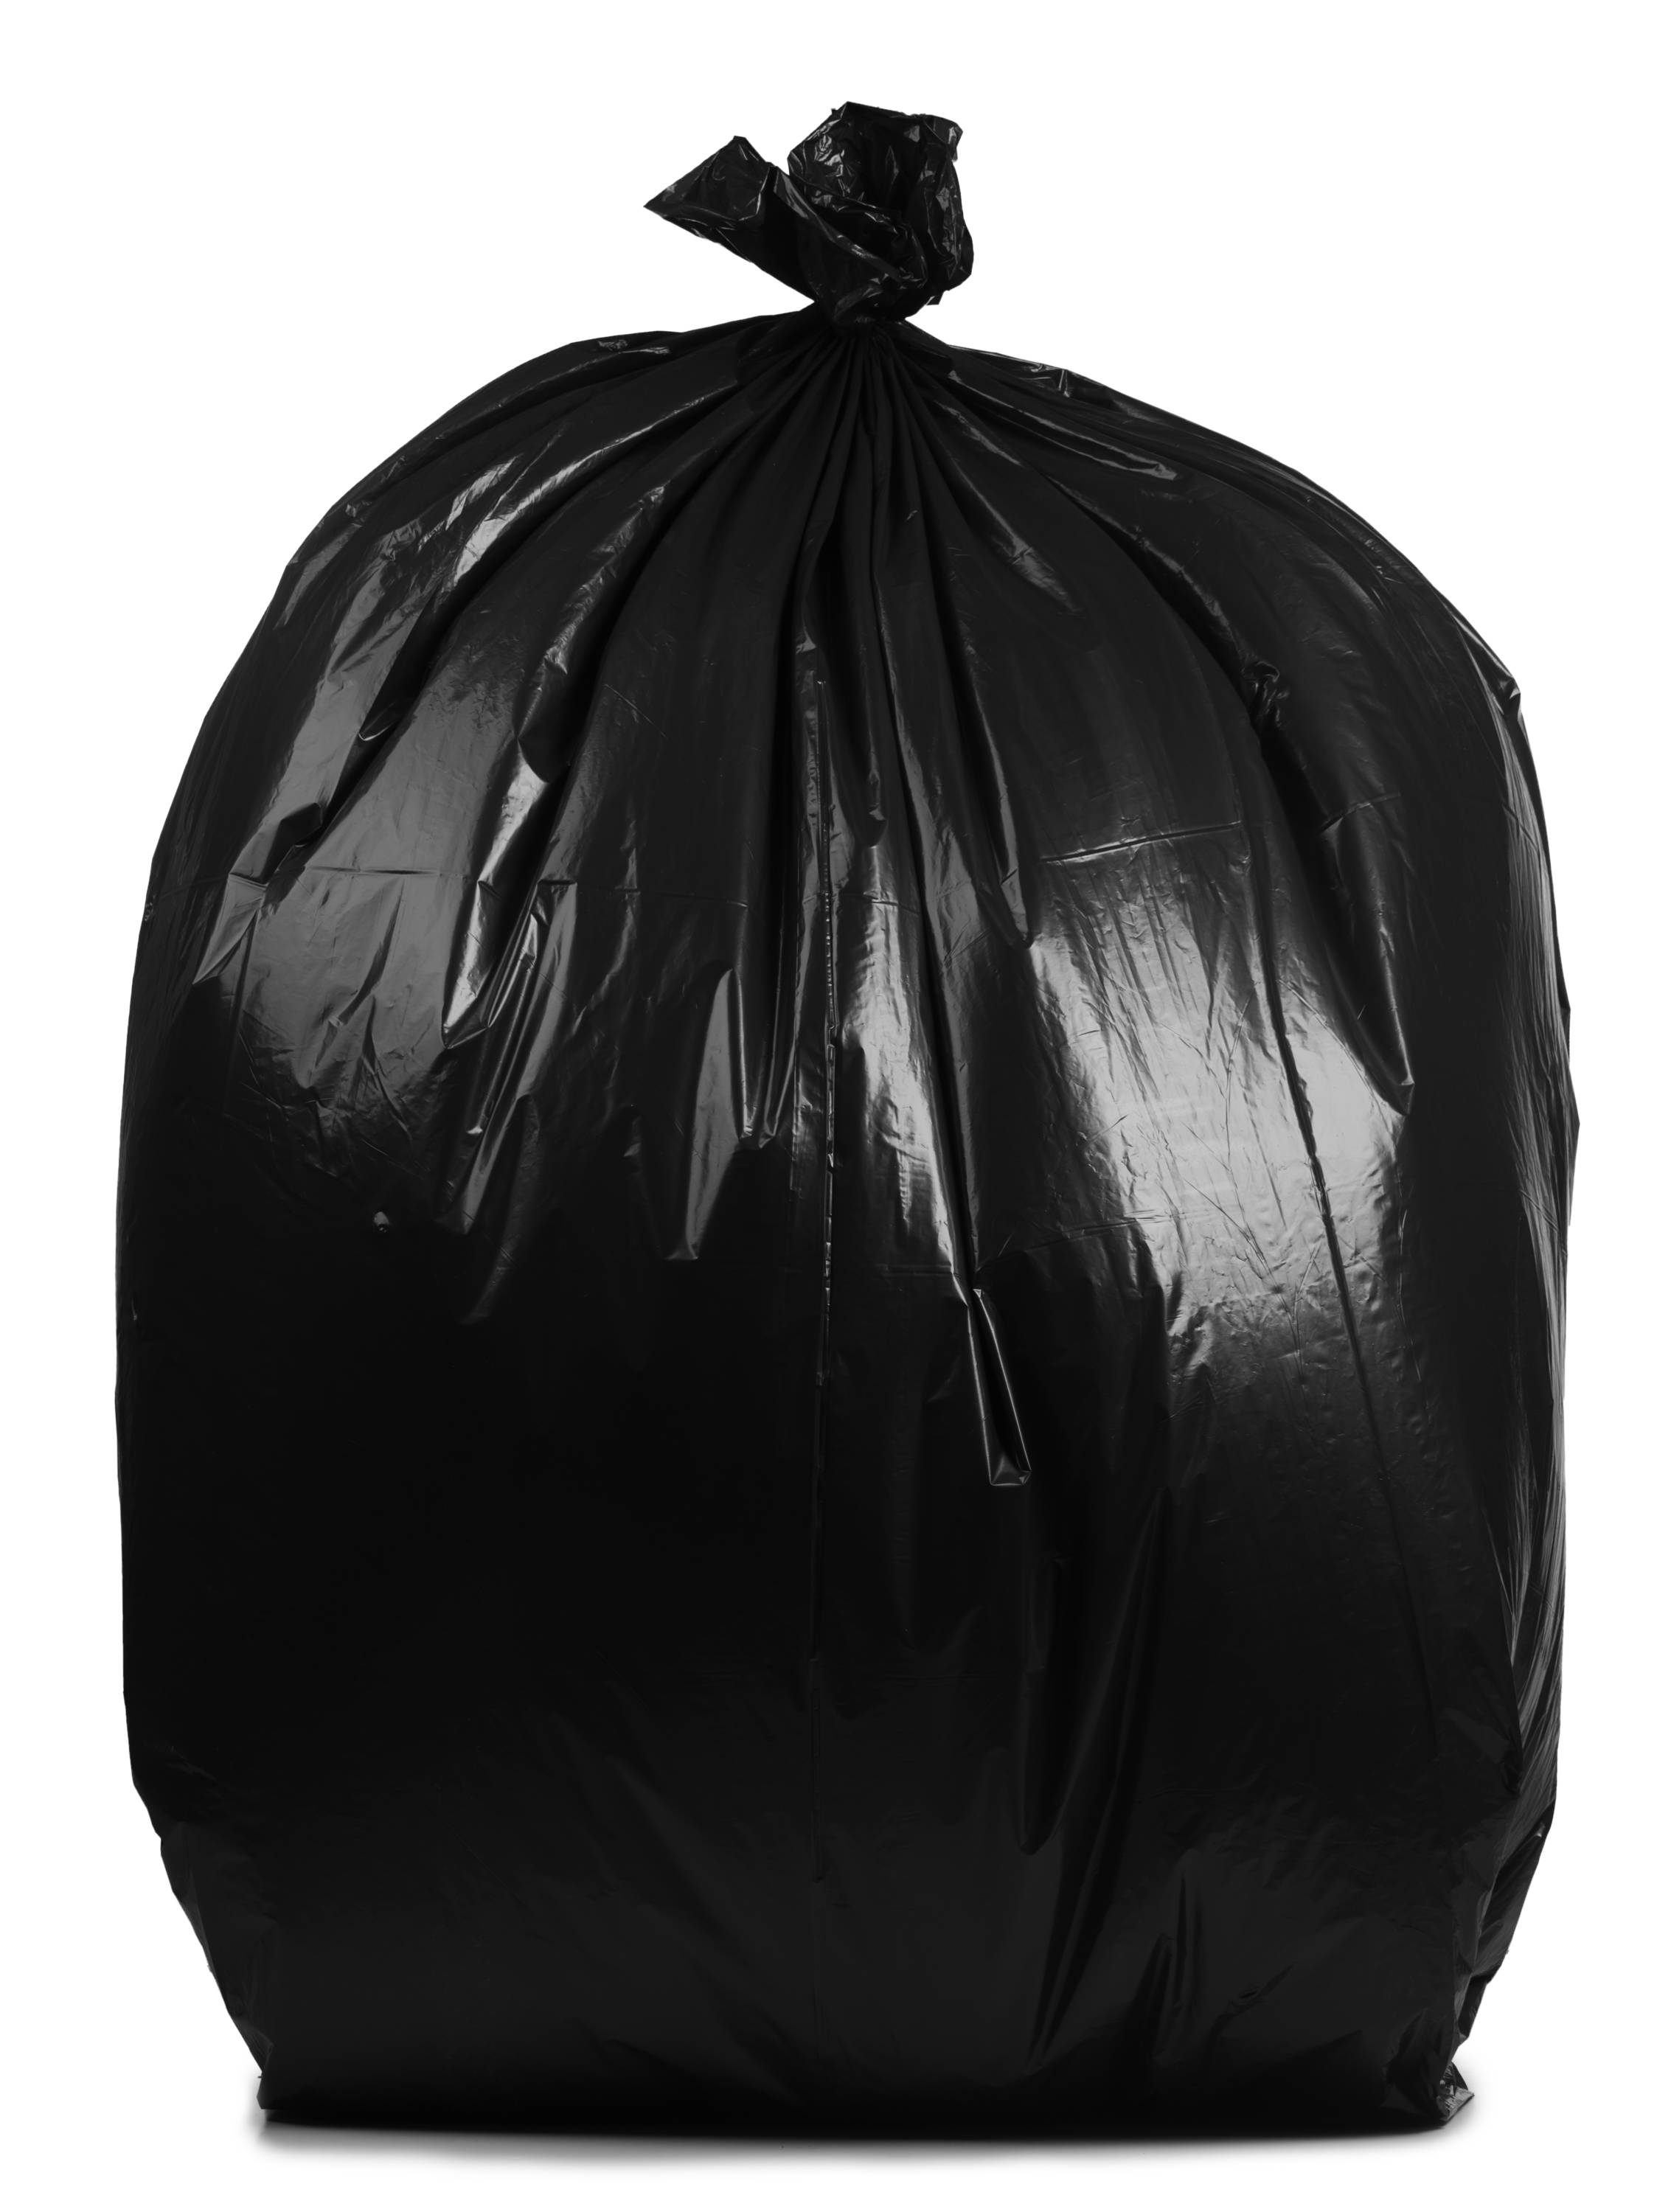 Strong Heavy Duty Black Bin Liners Bags Cleaning Disposable Rubbish Waste Sacks 